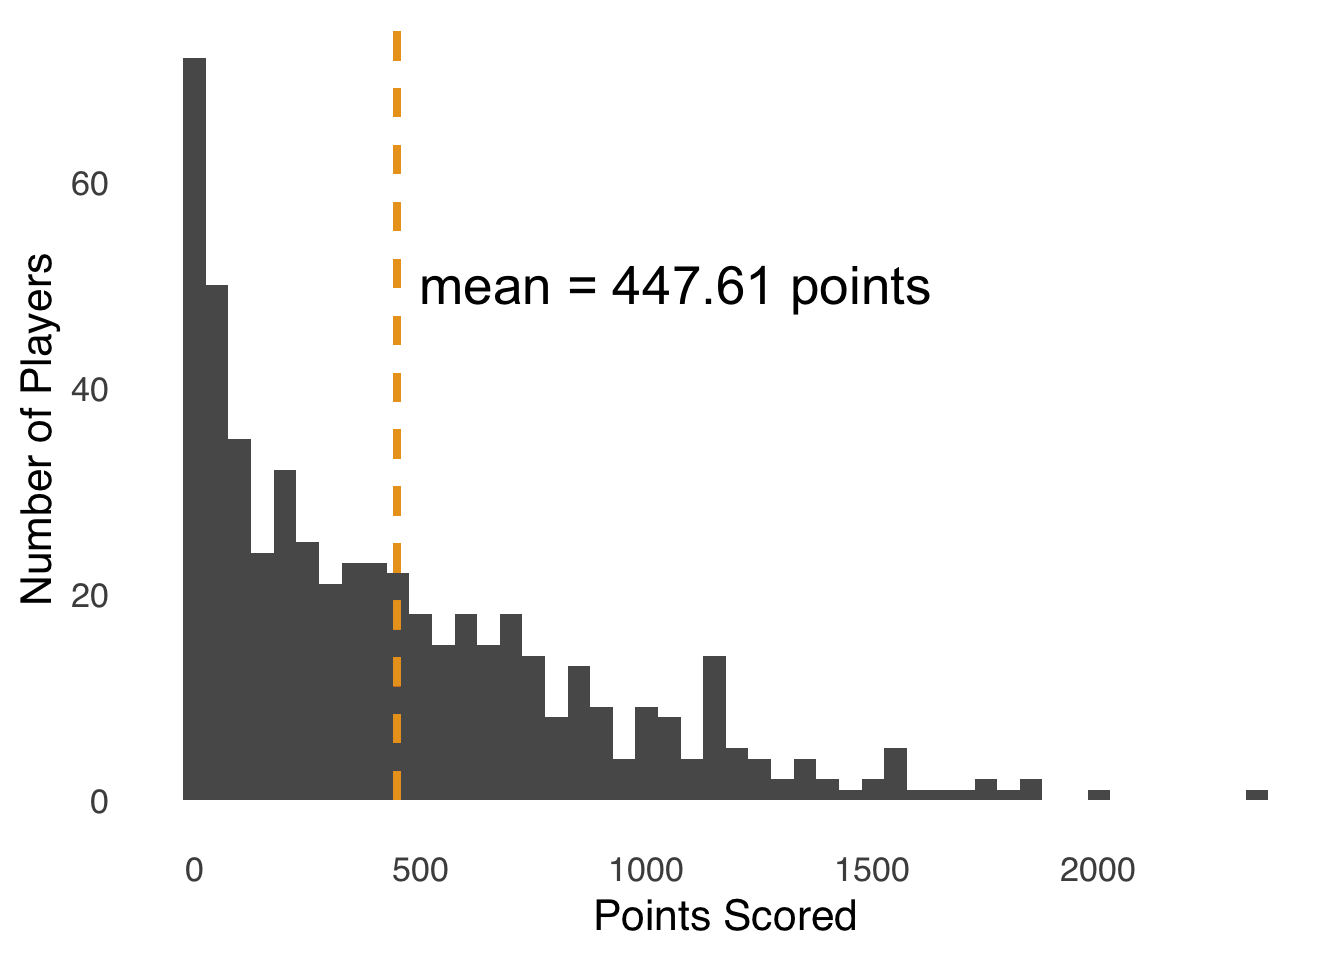 Histogram of Points Scored by Players in the 2019-2020 NBA Season; Dashed Line Indicates Mean Points Scored